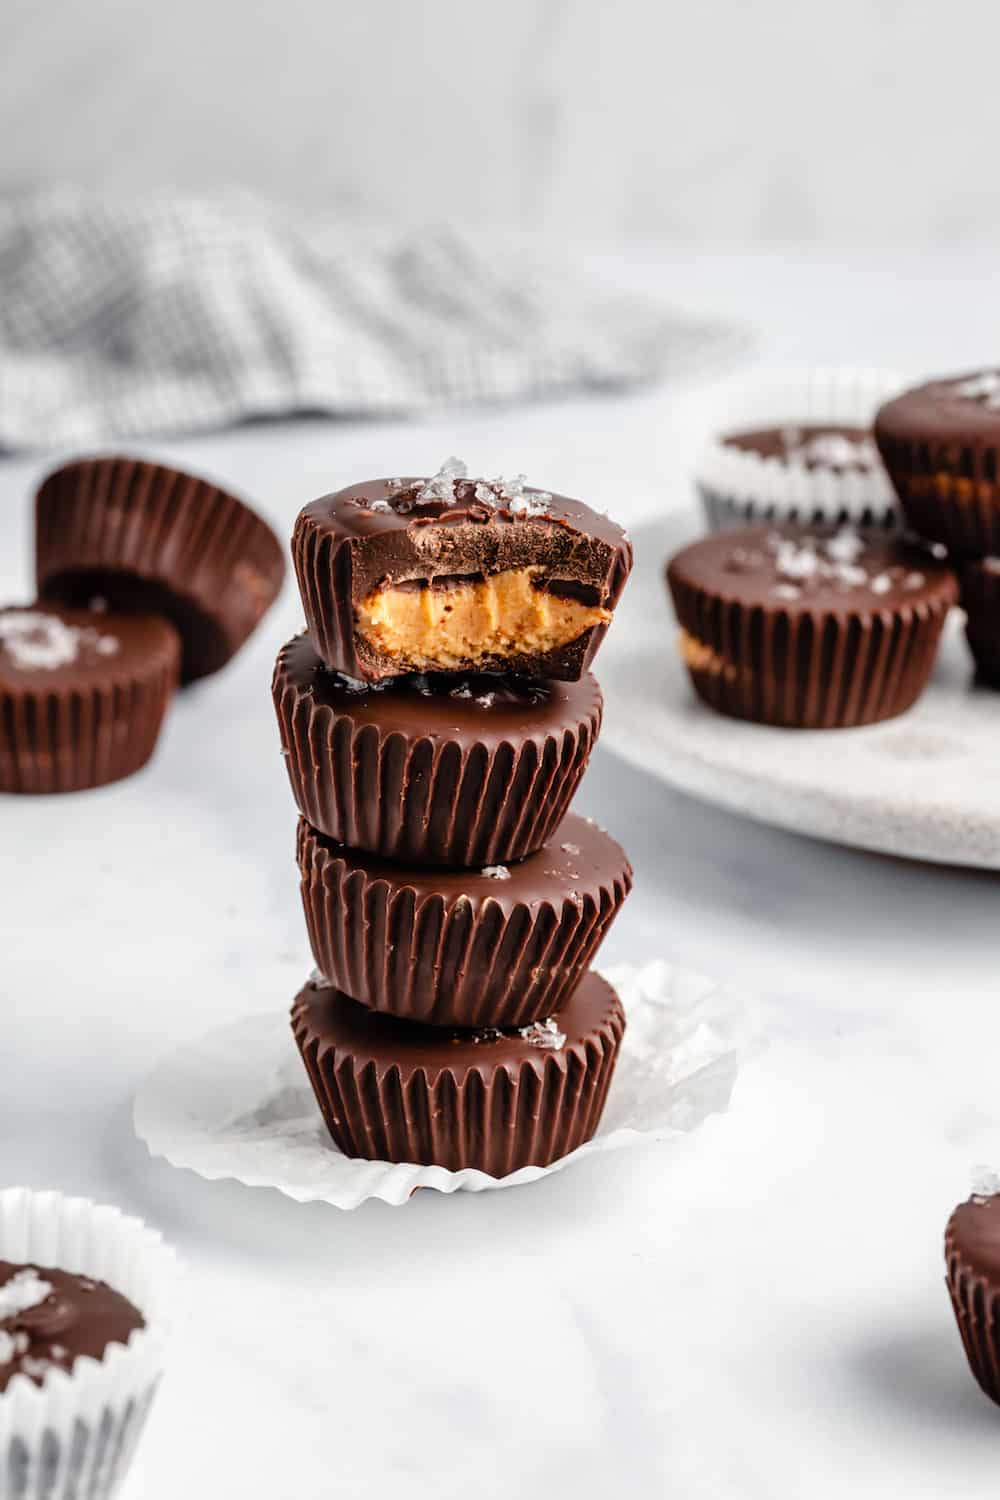 A Stack of Four Peanut Butter Cups, with a Bite Taken From the Top One